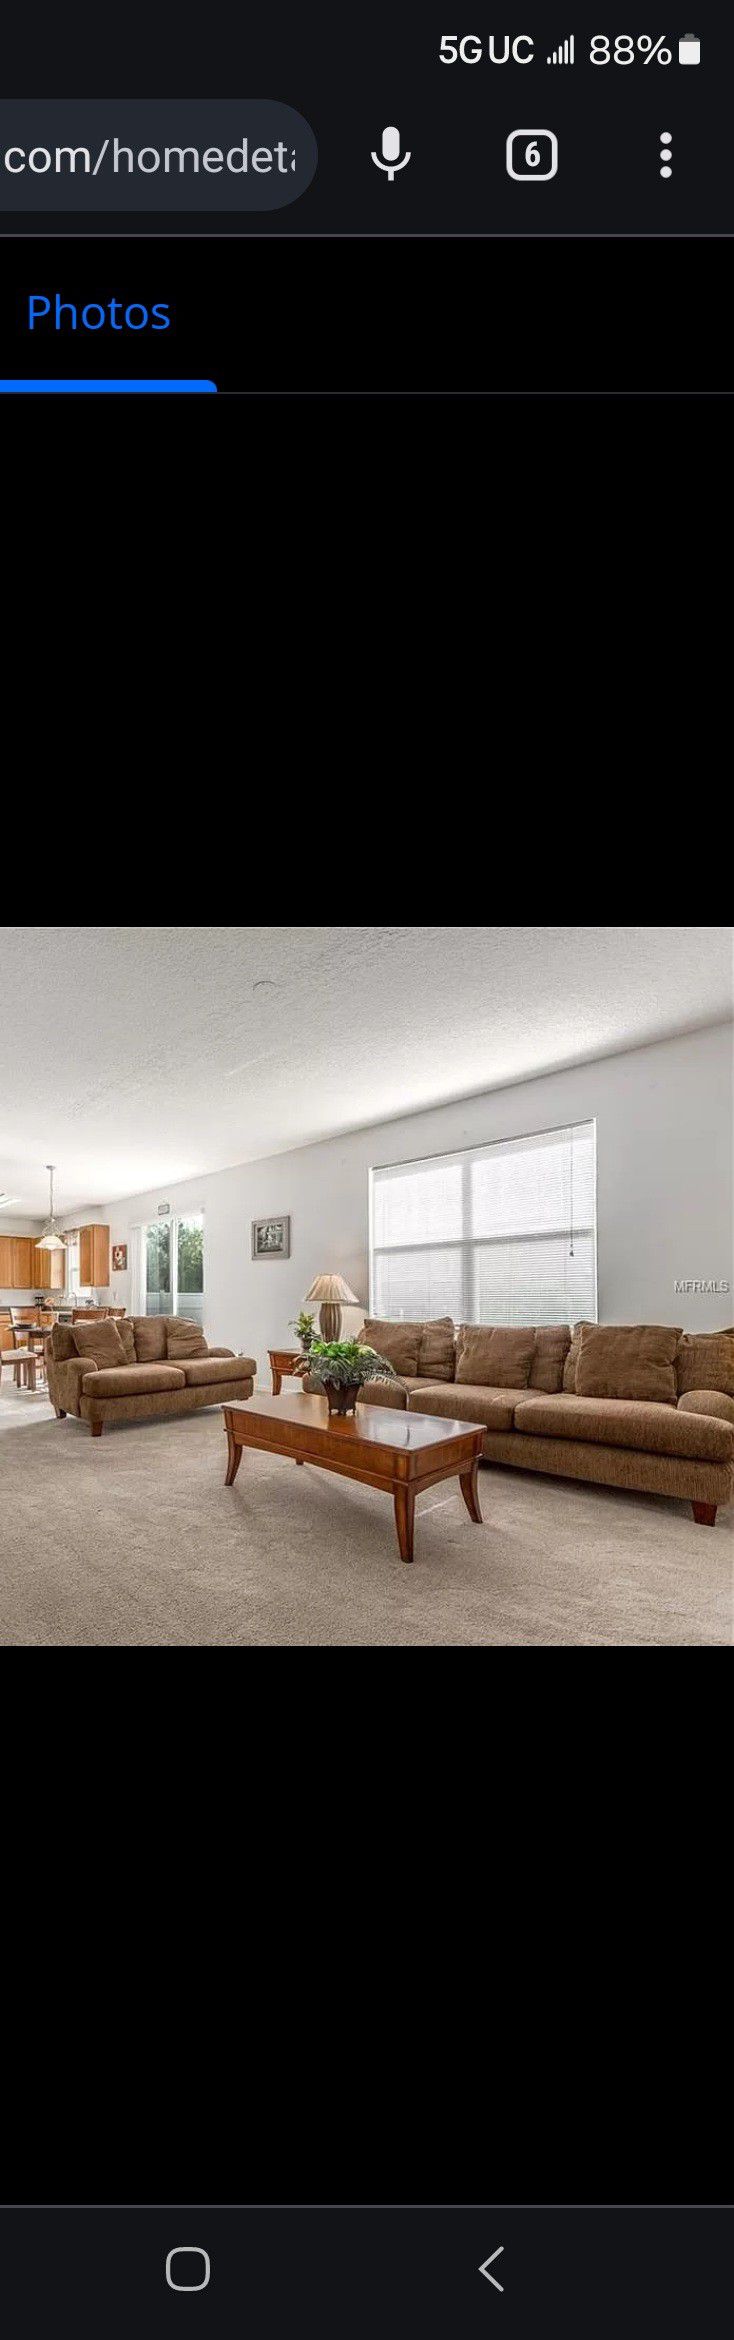 Sofa, Loveseat, Round Kitchen Table With 4 Chairs